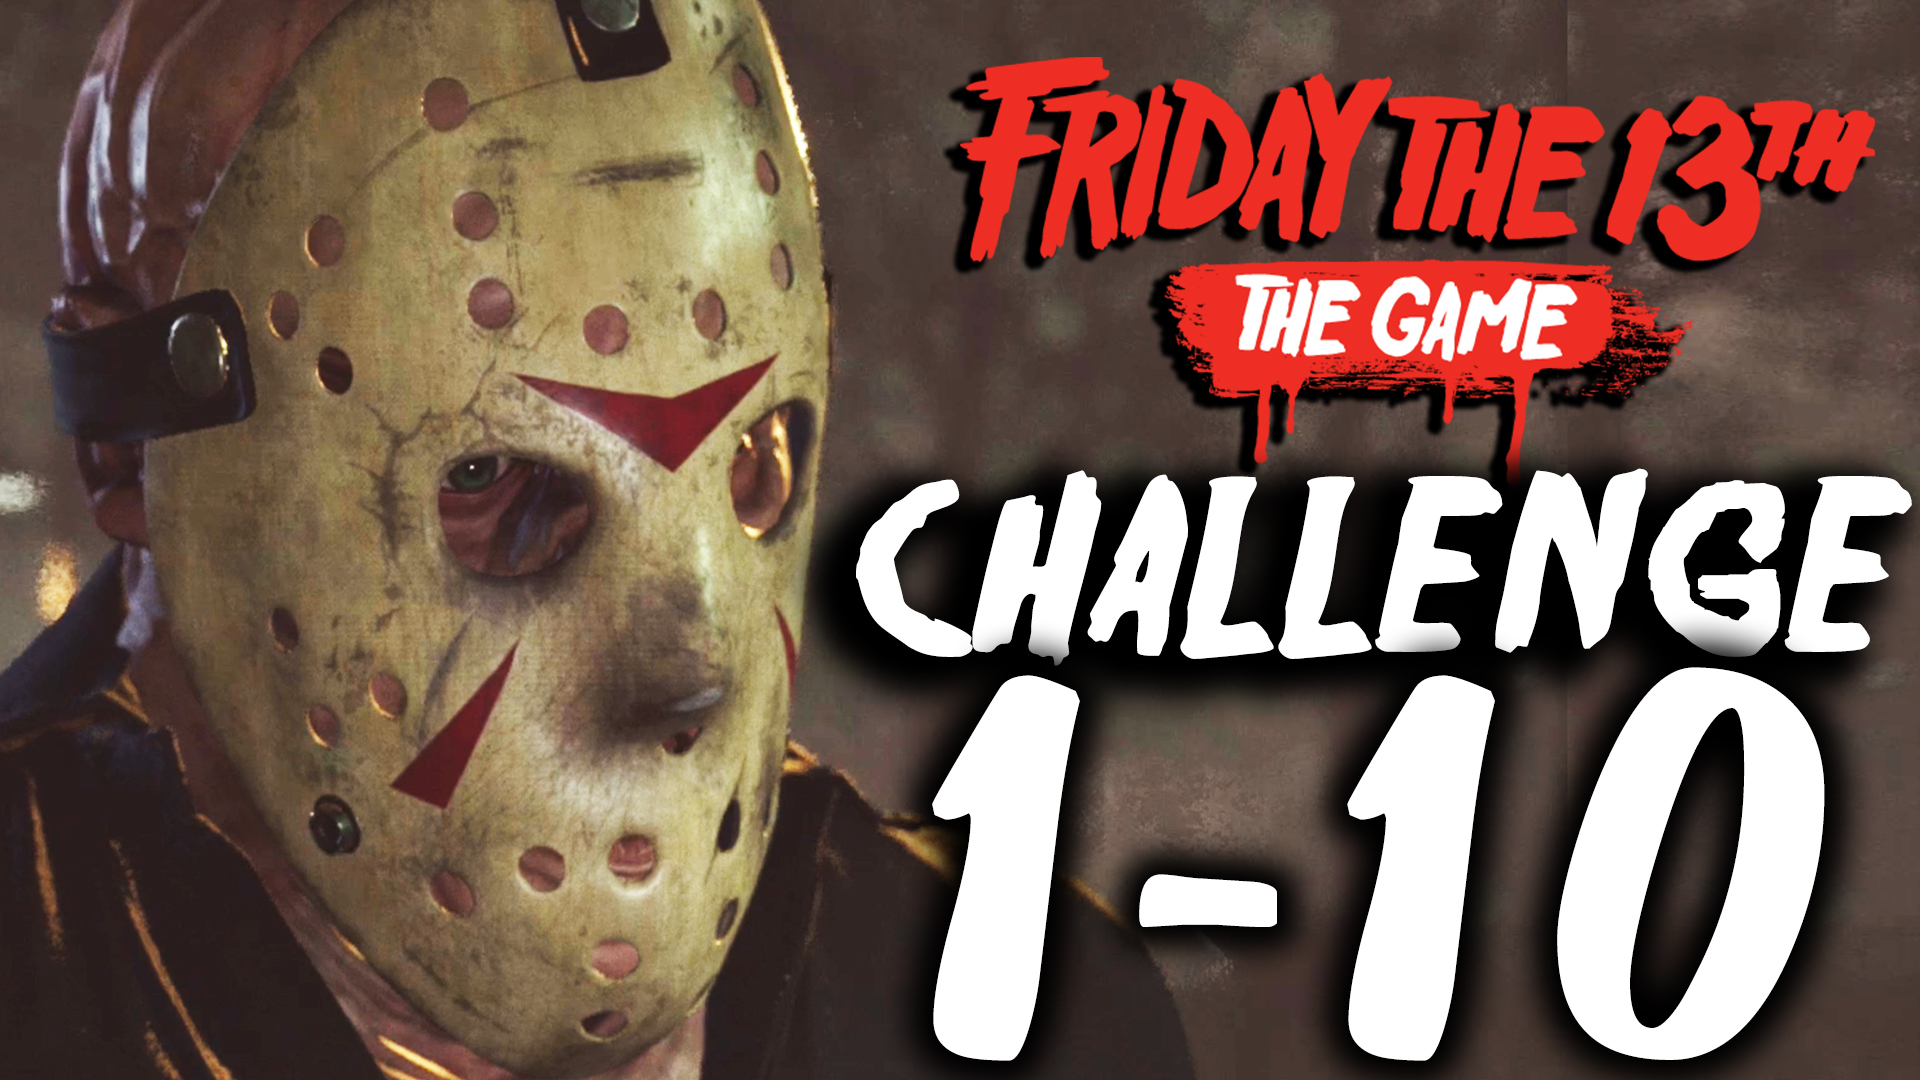 Complete Walkthrough For All 10 Challenges in Friday the 13th: The Game